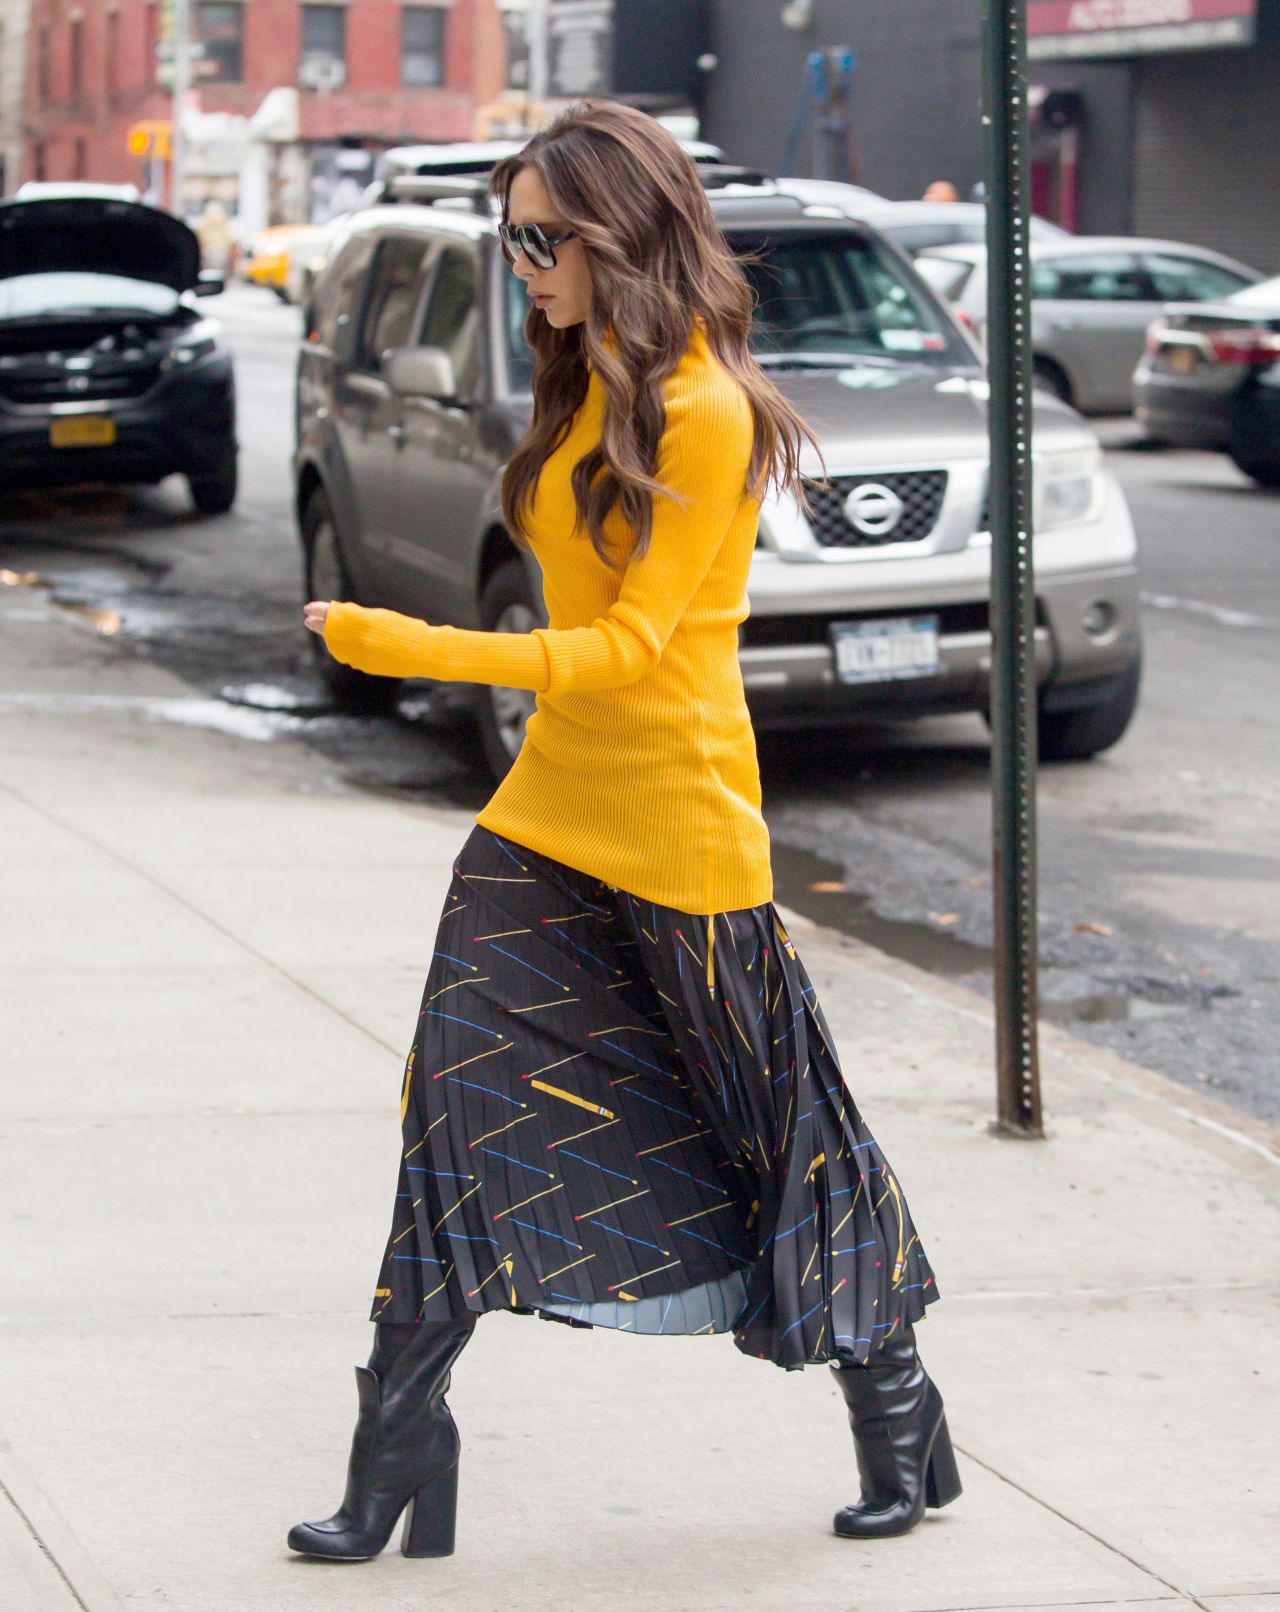 Victoria Beckham Style - Heading to Her Showroom in New 